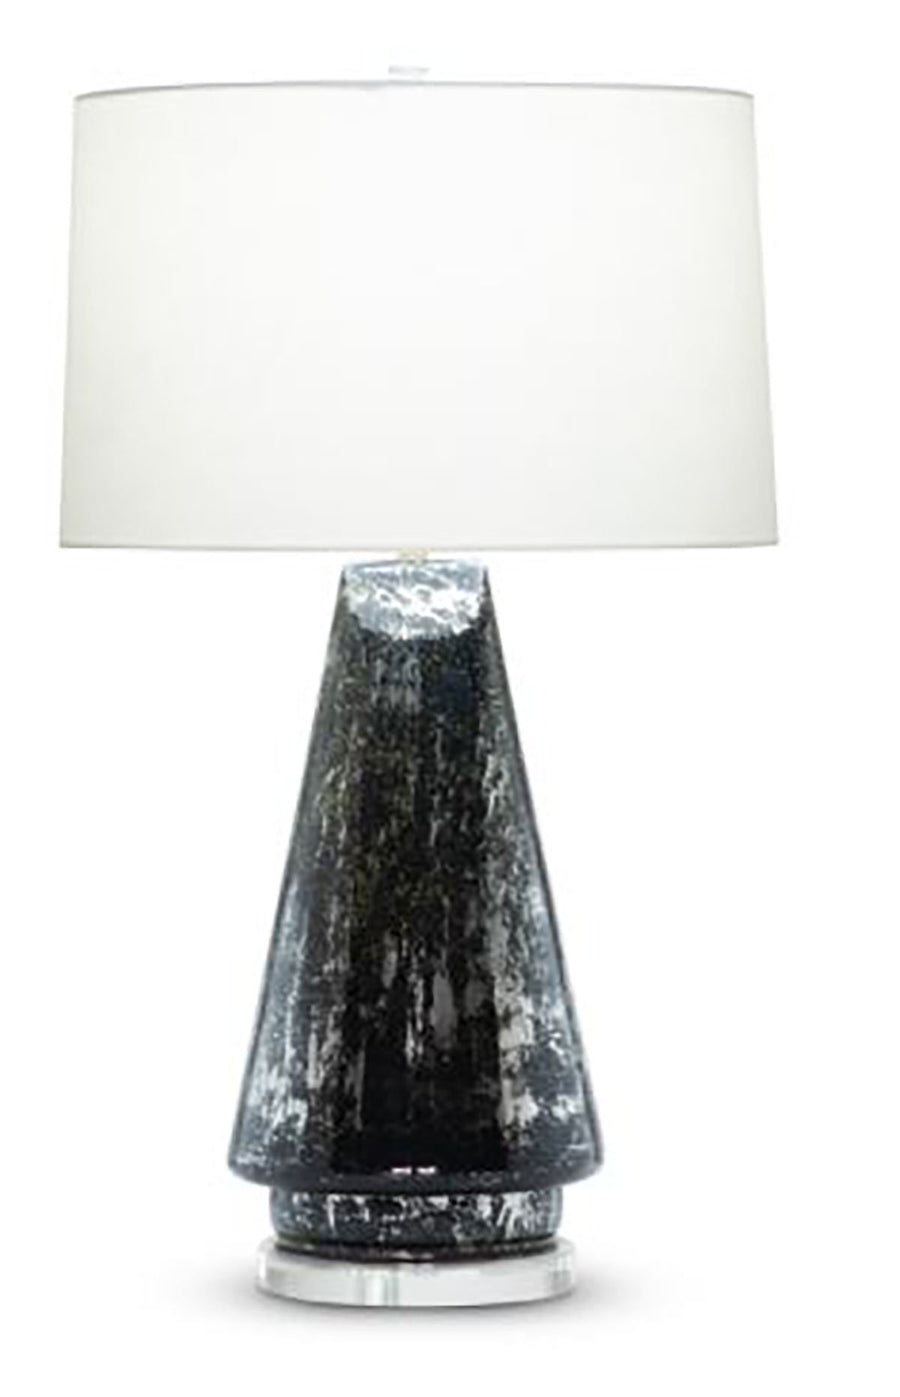 Morgan Table Lamp with a tapered silhouette body, acrylic base and white drum shaped shade.